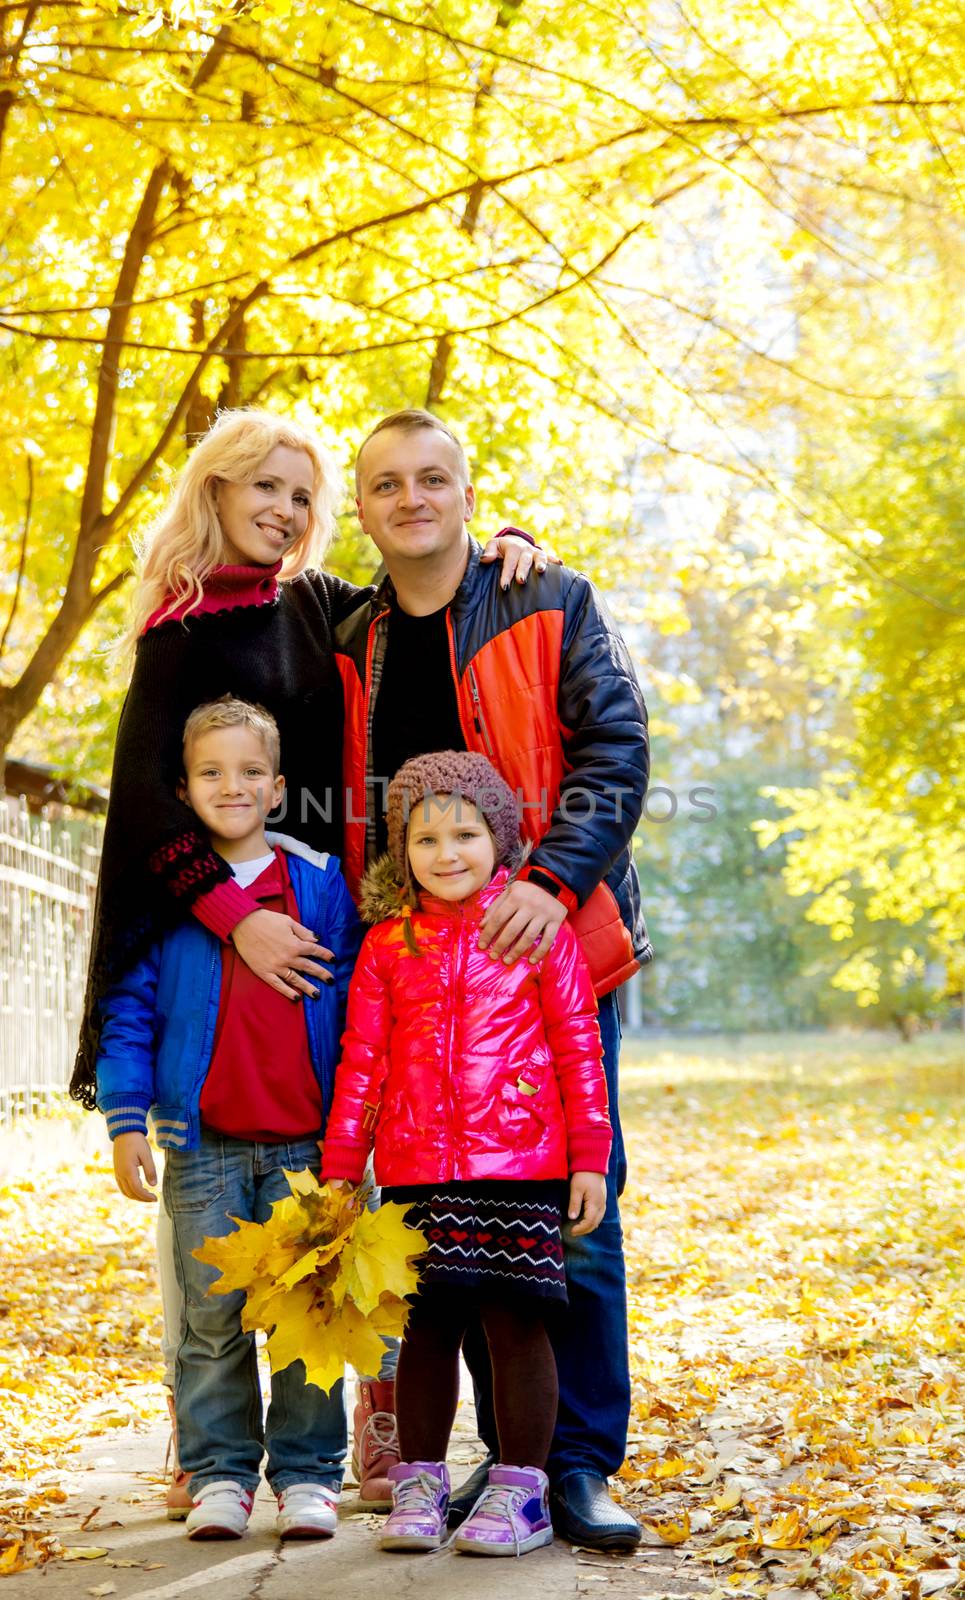 Family of four in autumn park by Angel_a